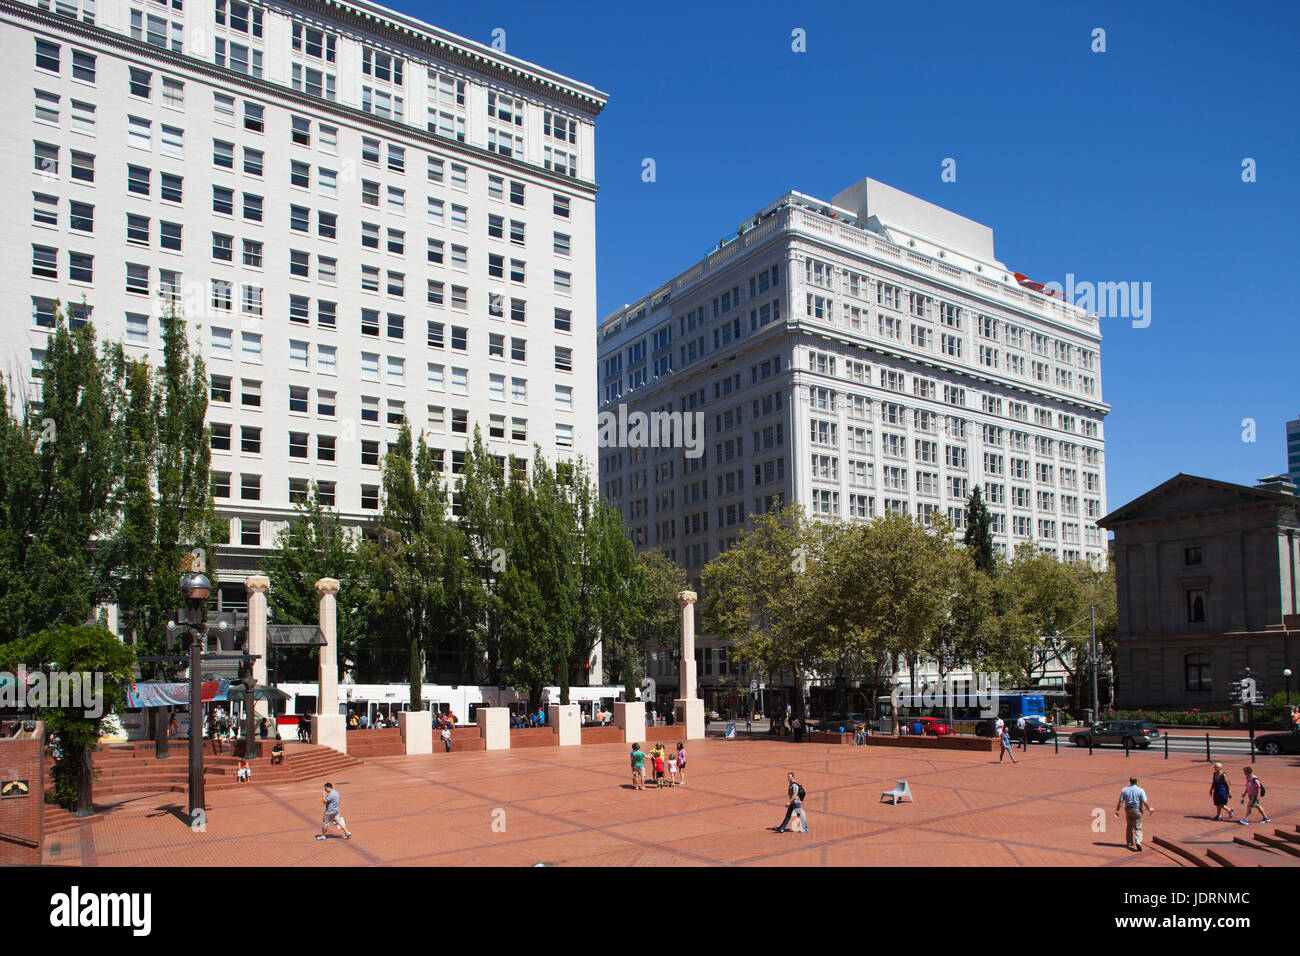 America, state of Oregon, town of Portland, Pioneer Courthouse Square Stock Photo